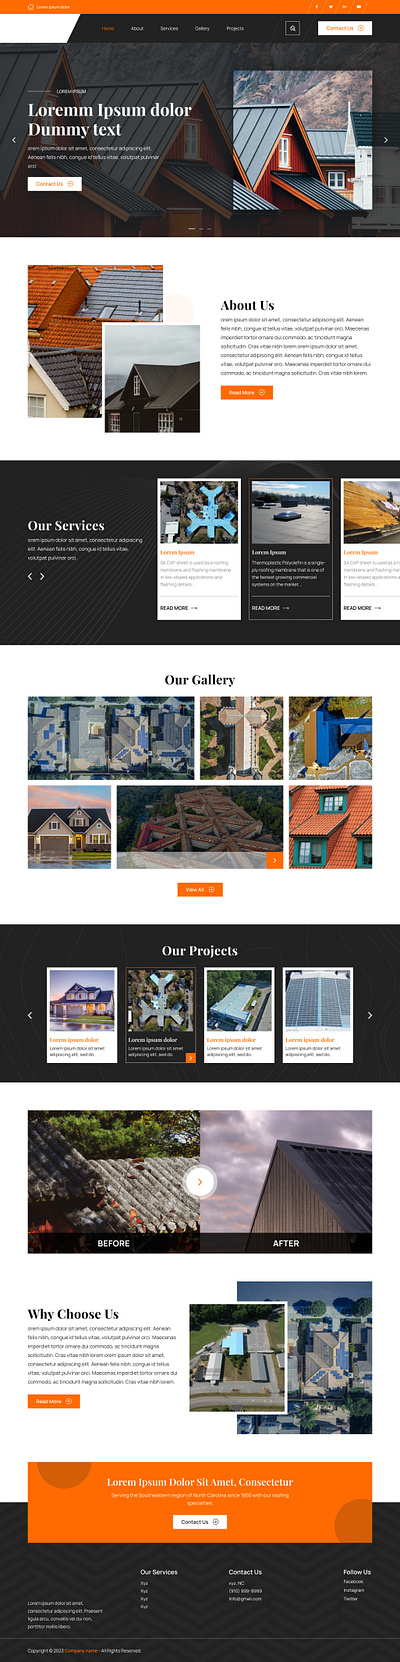 Roofing Contractor Homepage Layout Design contractor design homepage homepagedesign roofing ui weblayout